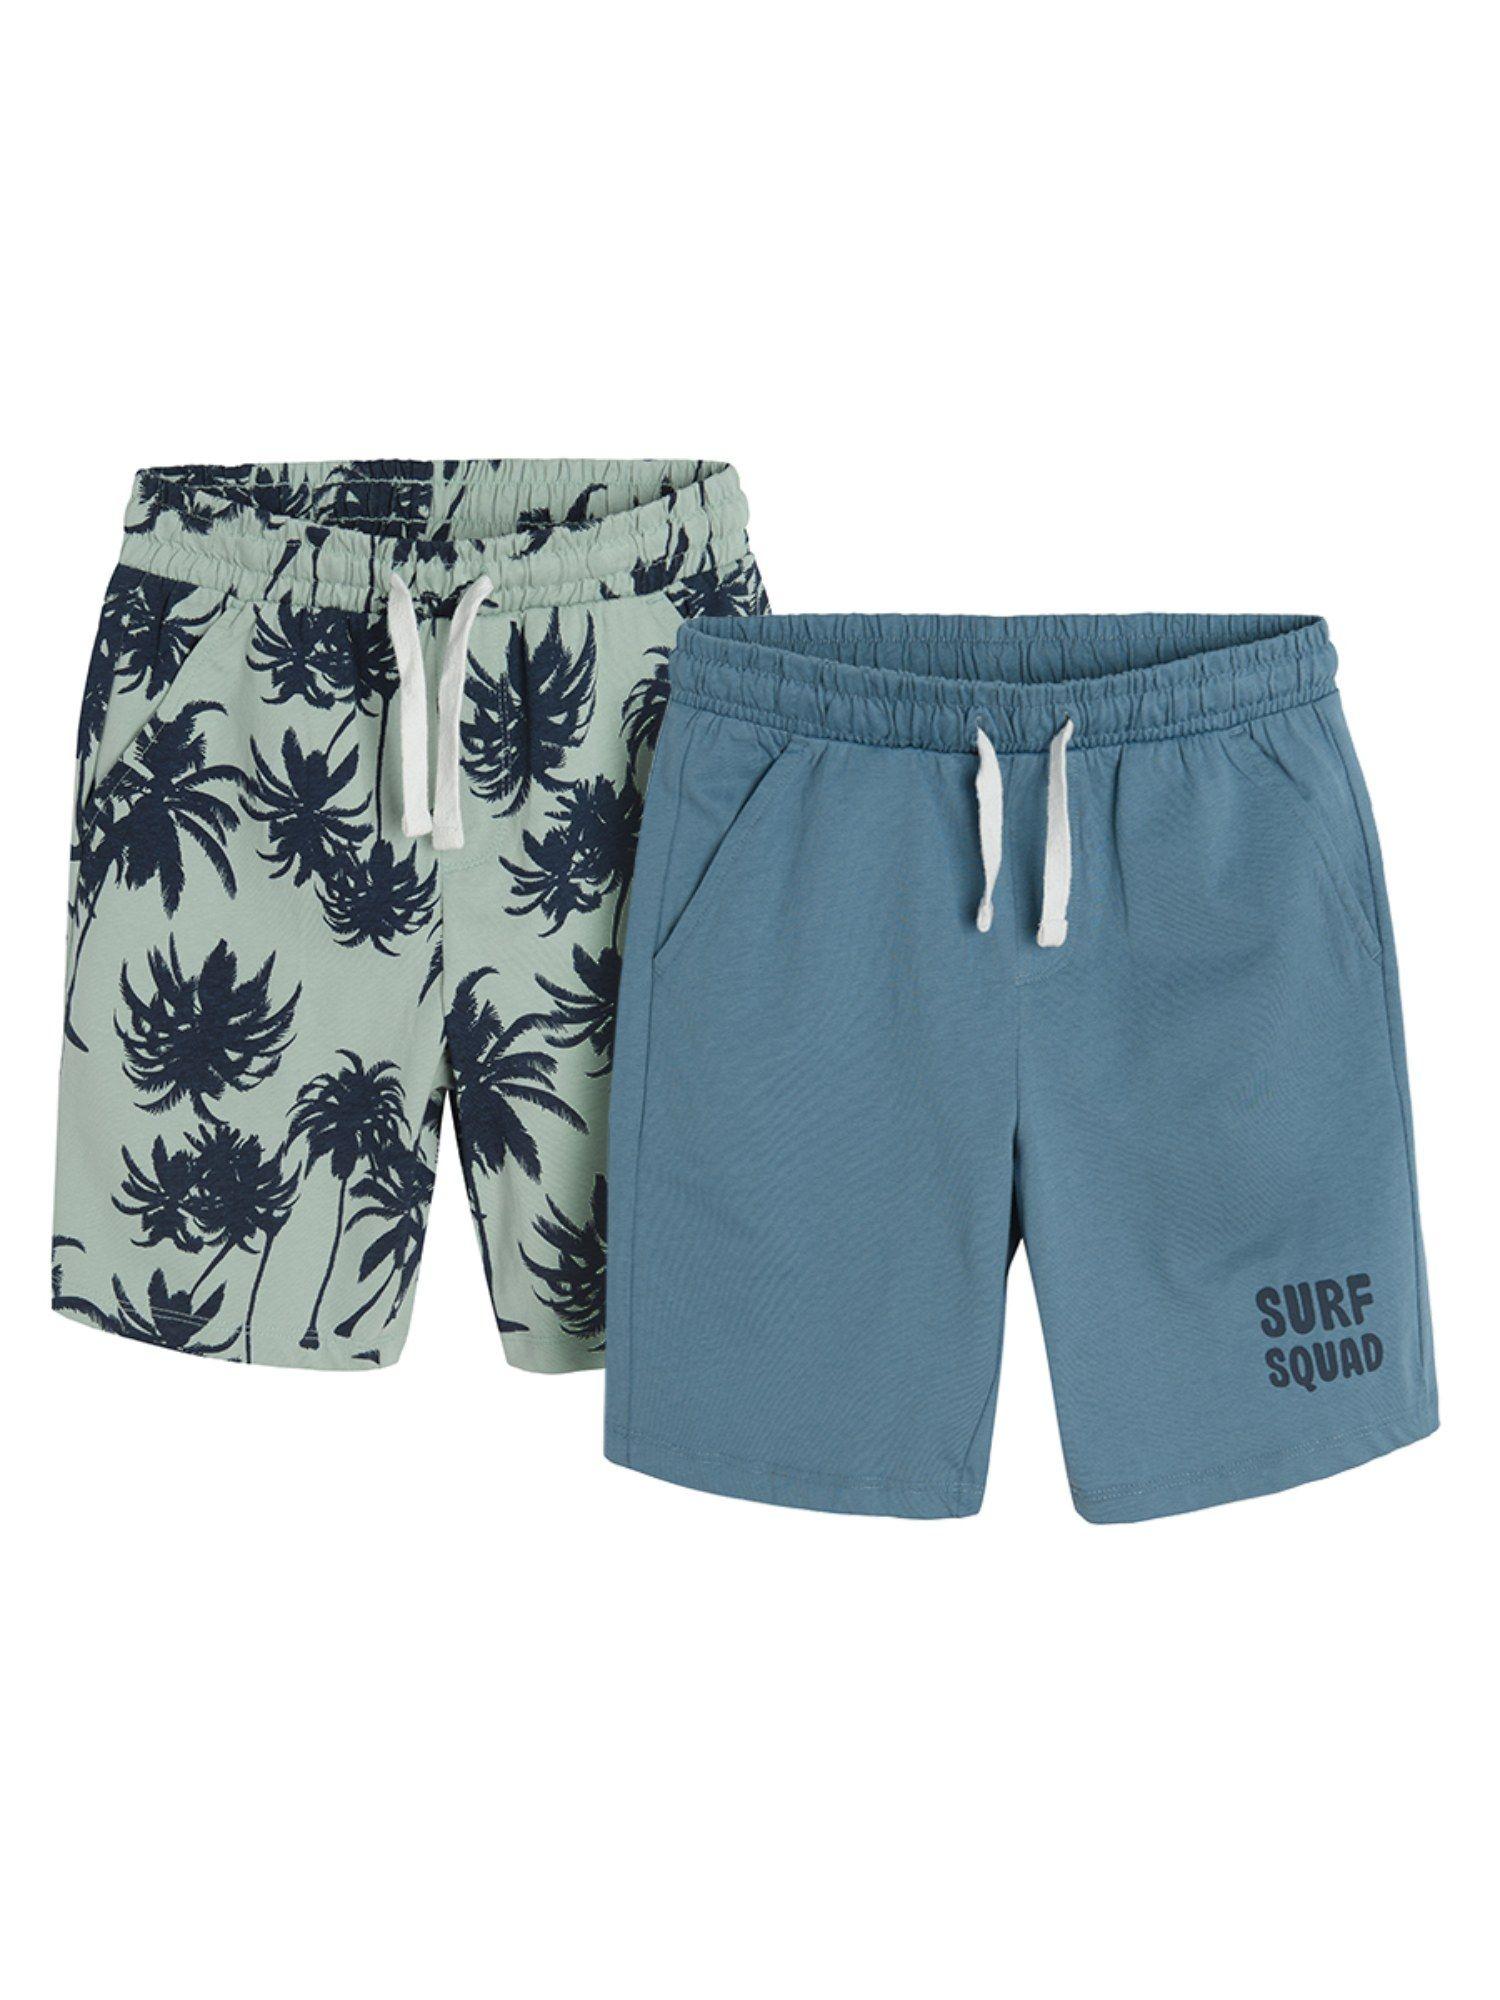 smyk boys multi-color printed shorts (pack of 2)